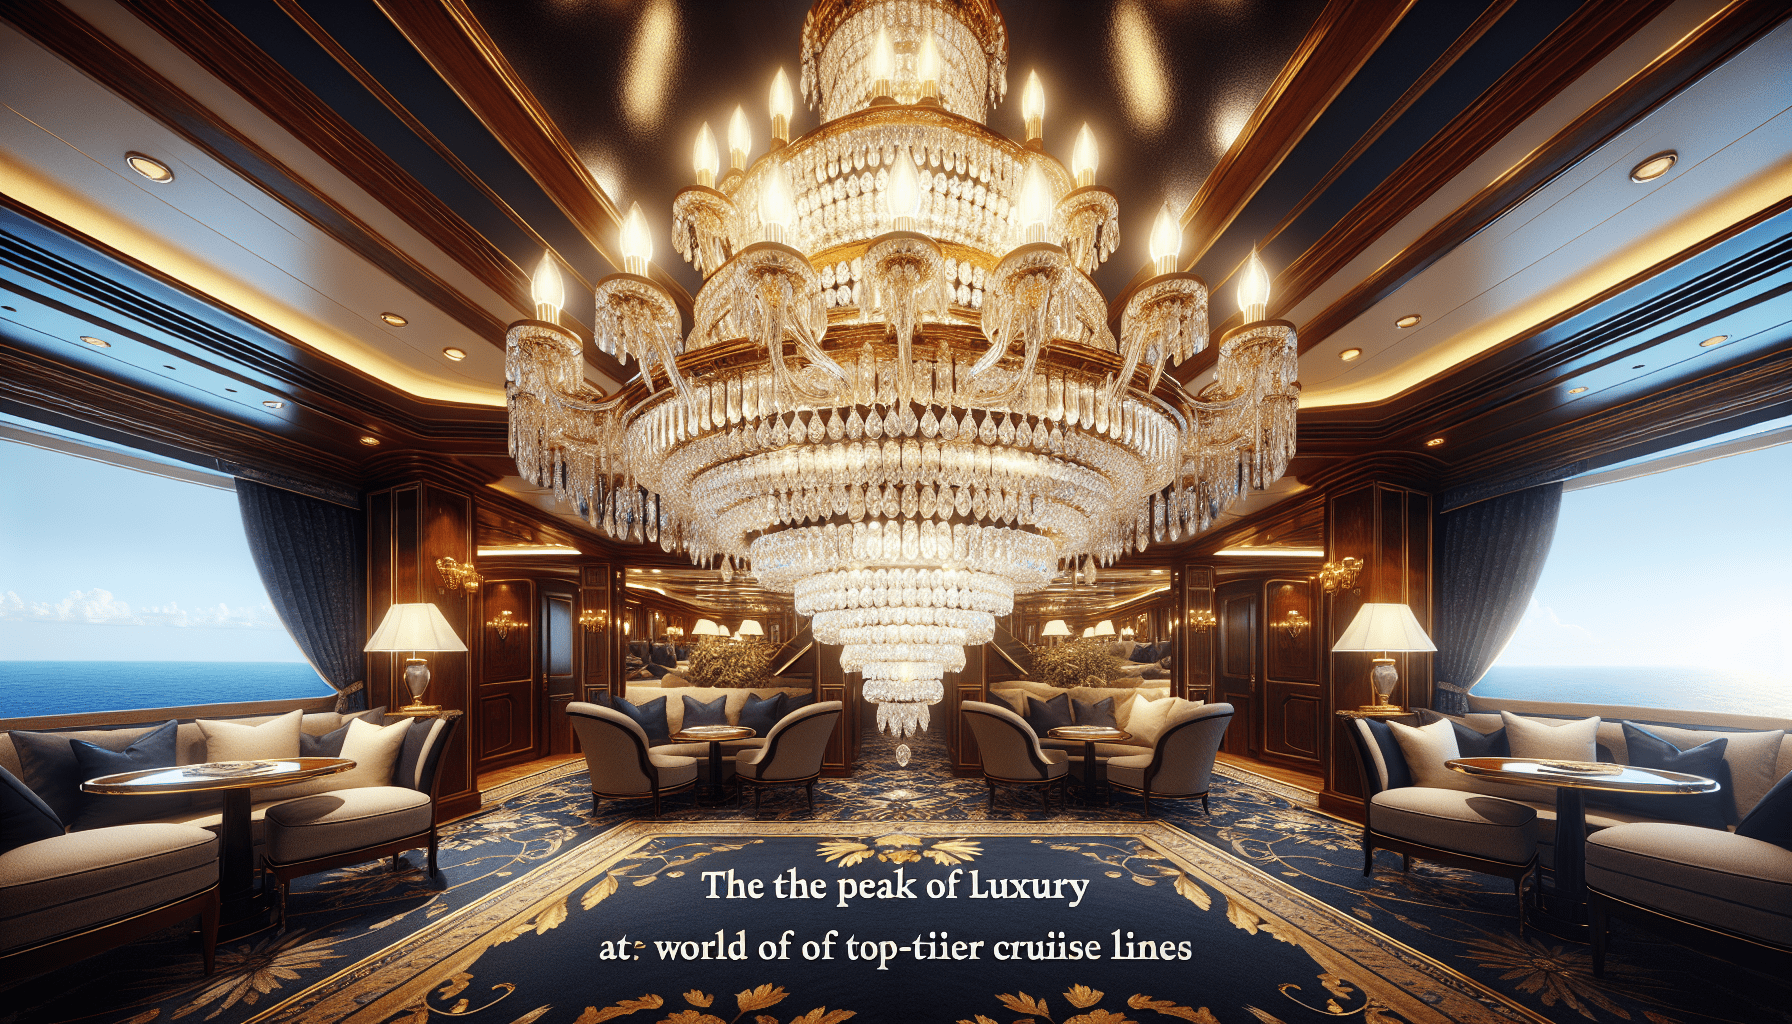 Which Is The Most Luxurious Cruise Line In The World?